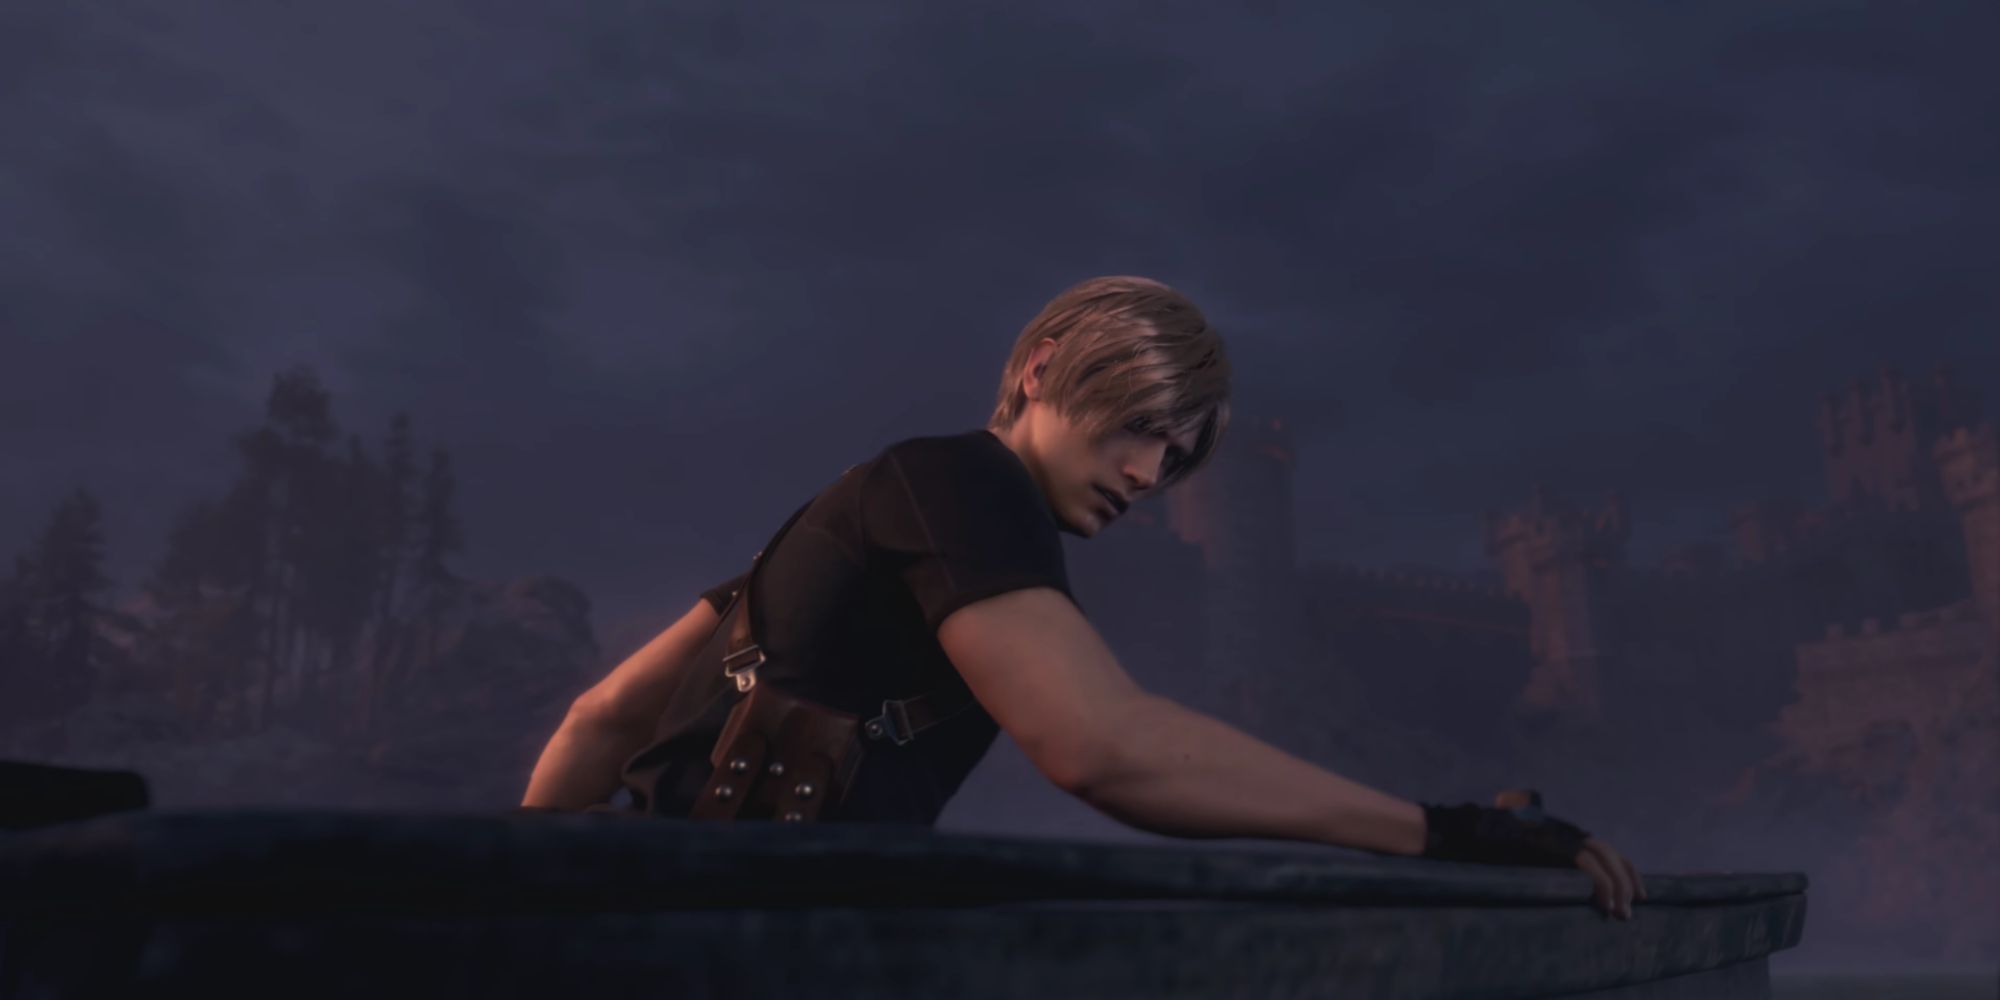 Leon about to encounter Del Lago in the Resident Evil 4 remake.